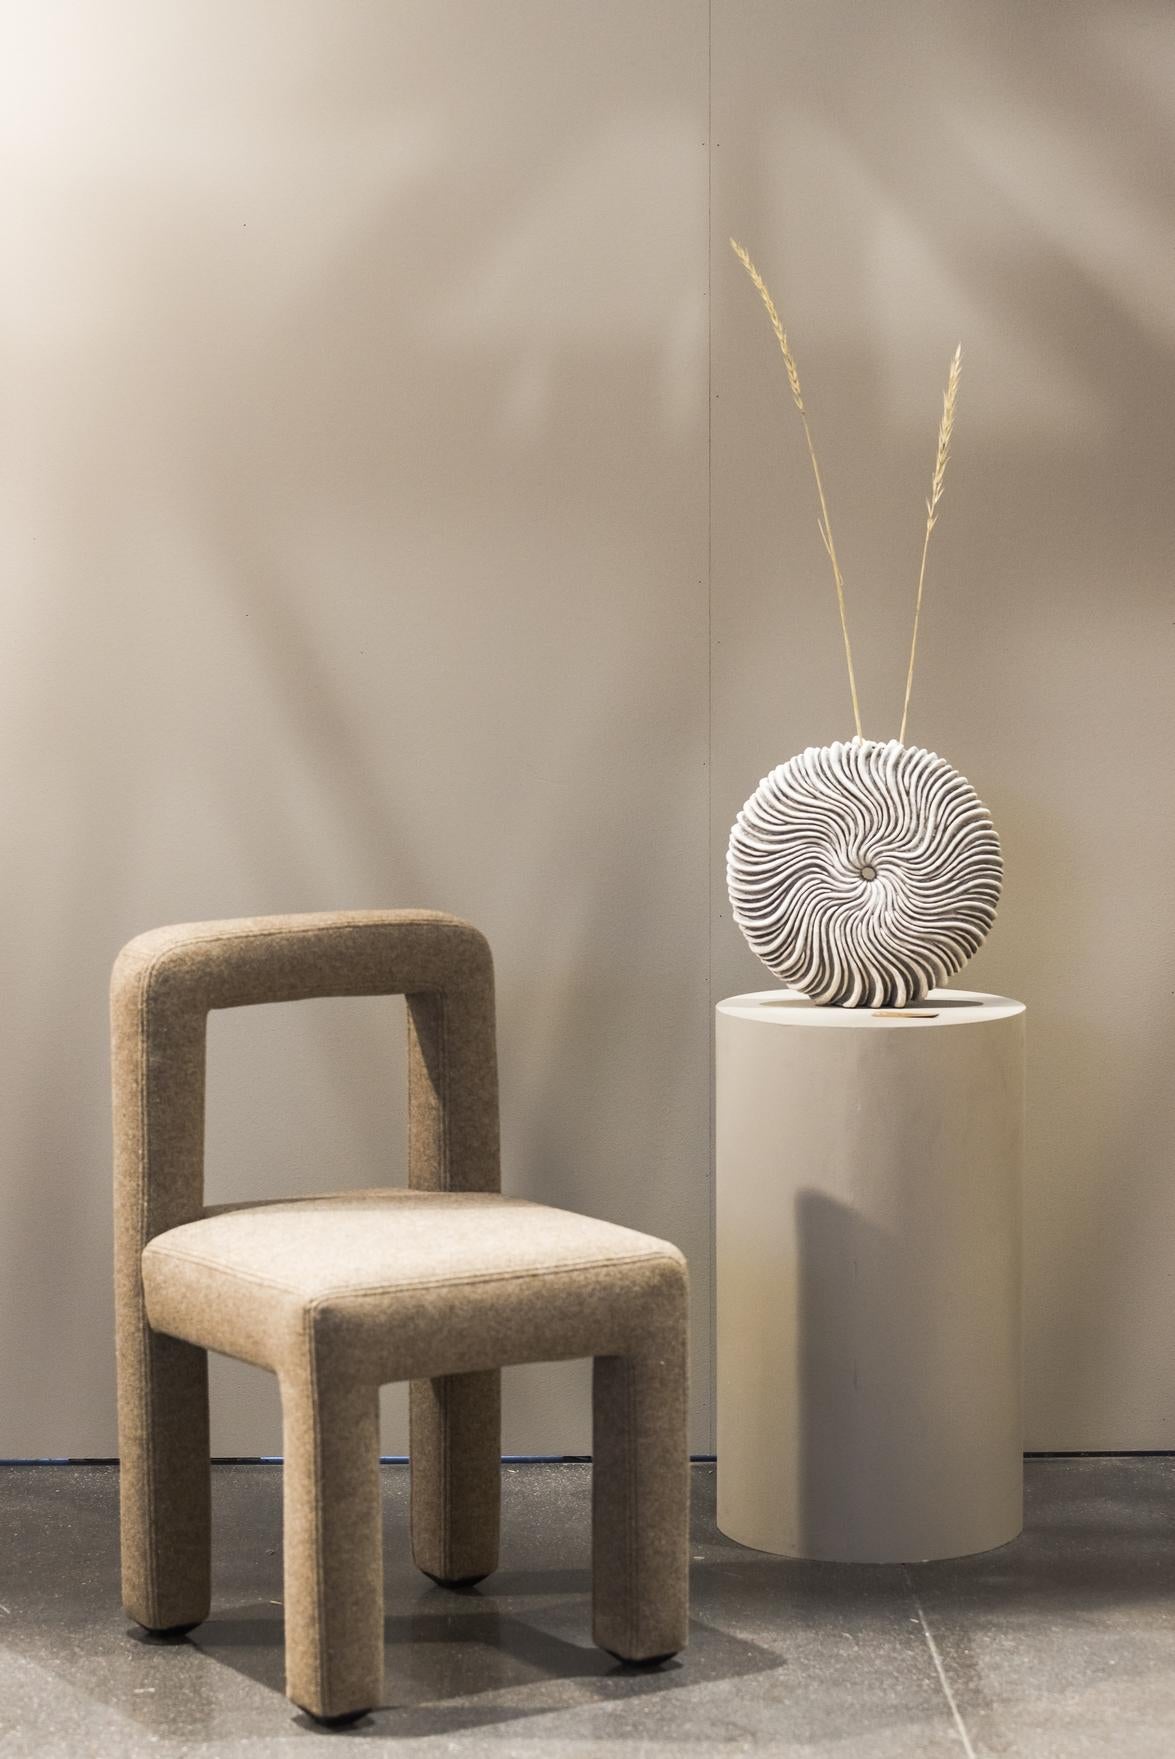 Toptun chair by FAINA
Design: Victoriya Yakusha
Material: Textiles, Foam rubber, Sintepon, Wood
Dimensions: Height: 78 x Front width: 46 x Side width: 48 cm
 Weight: 12,1 kilos.
(Also available in longer version 240 cm width)

Made in the style of